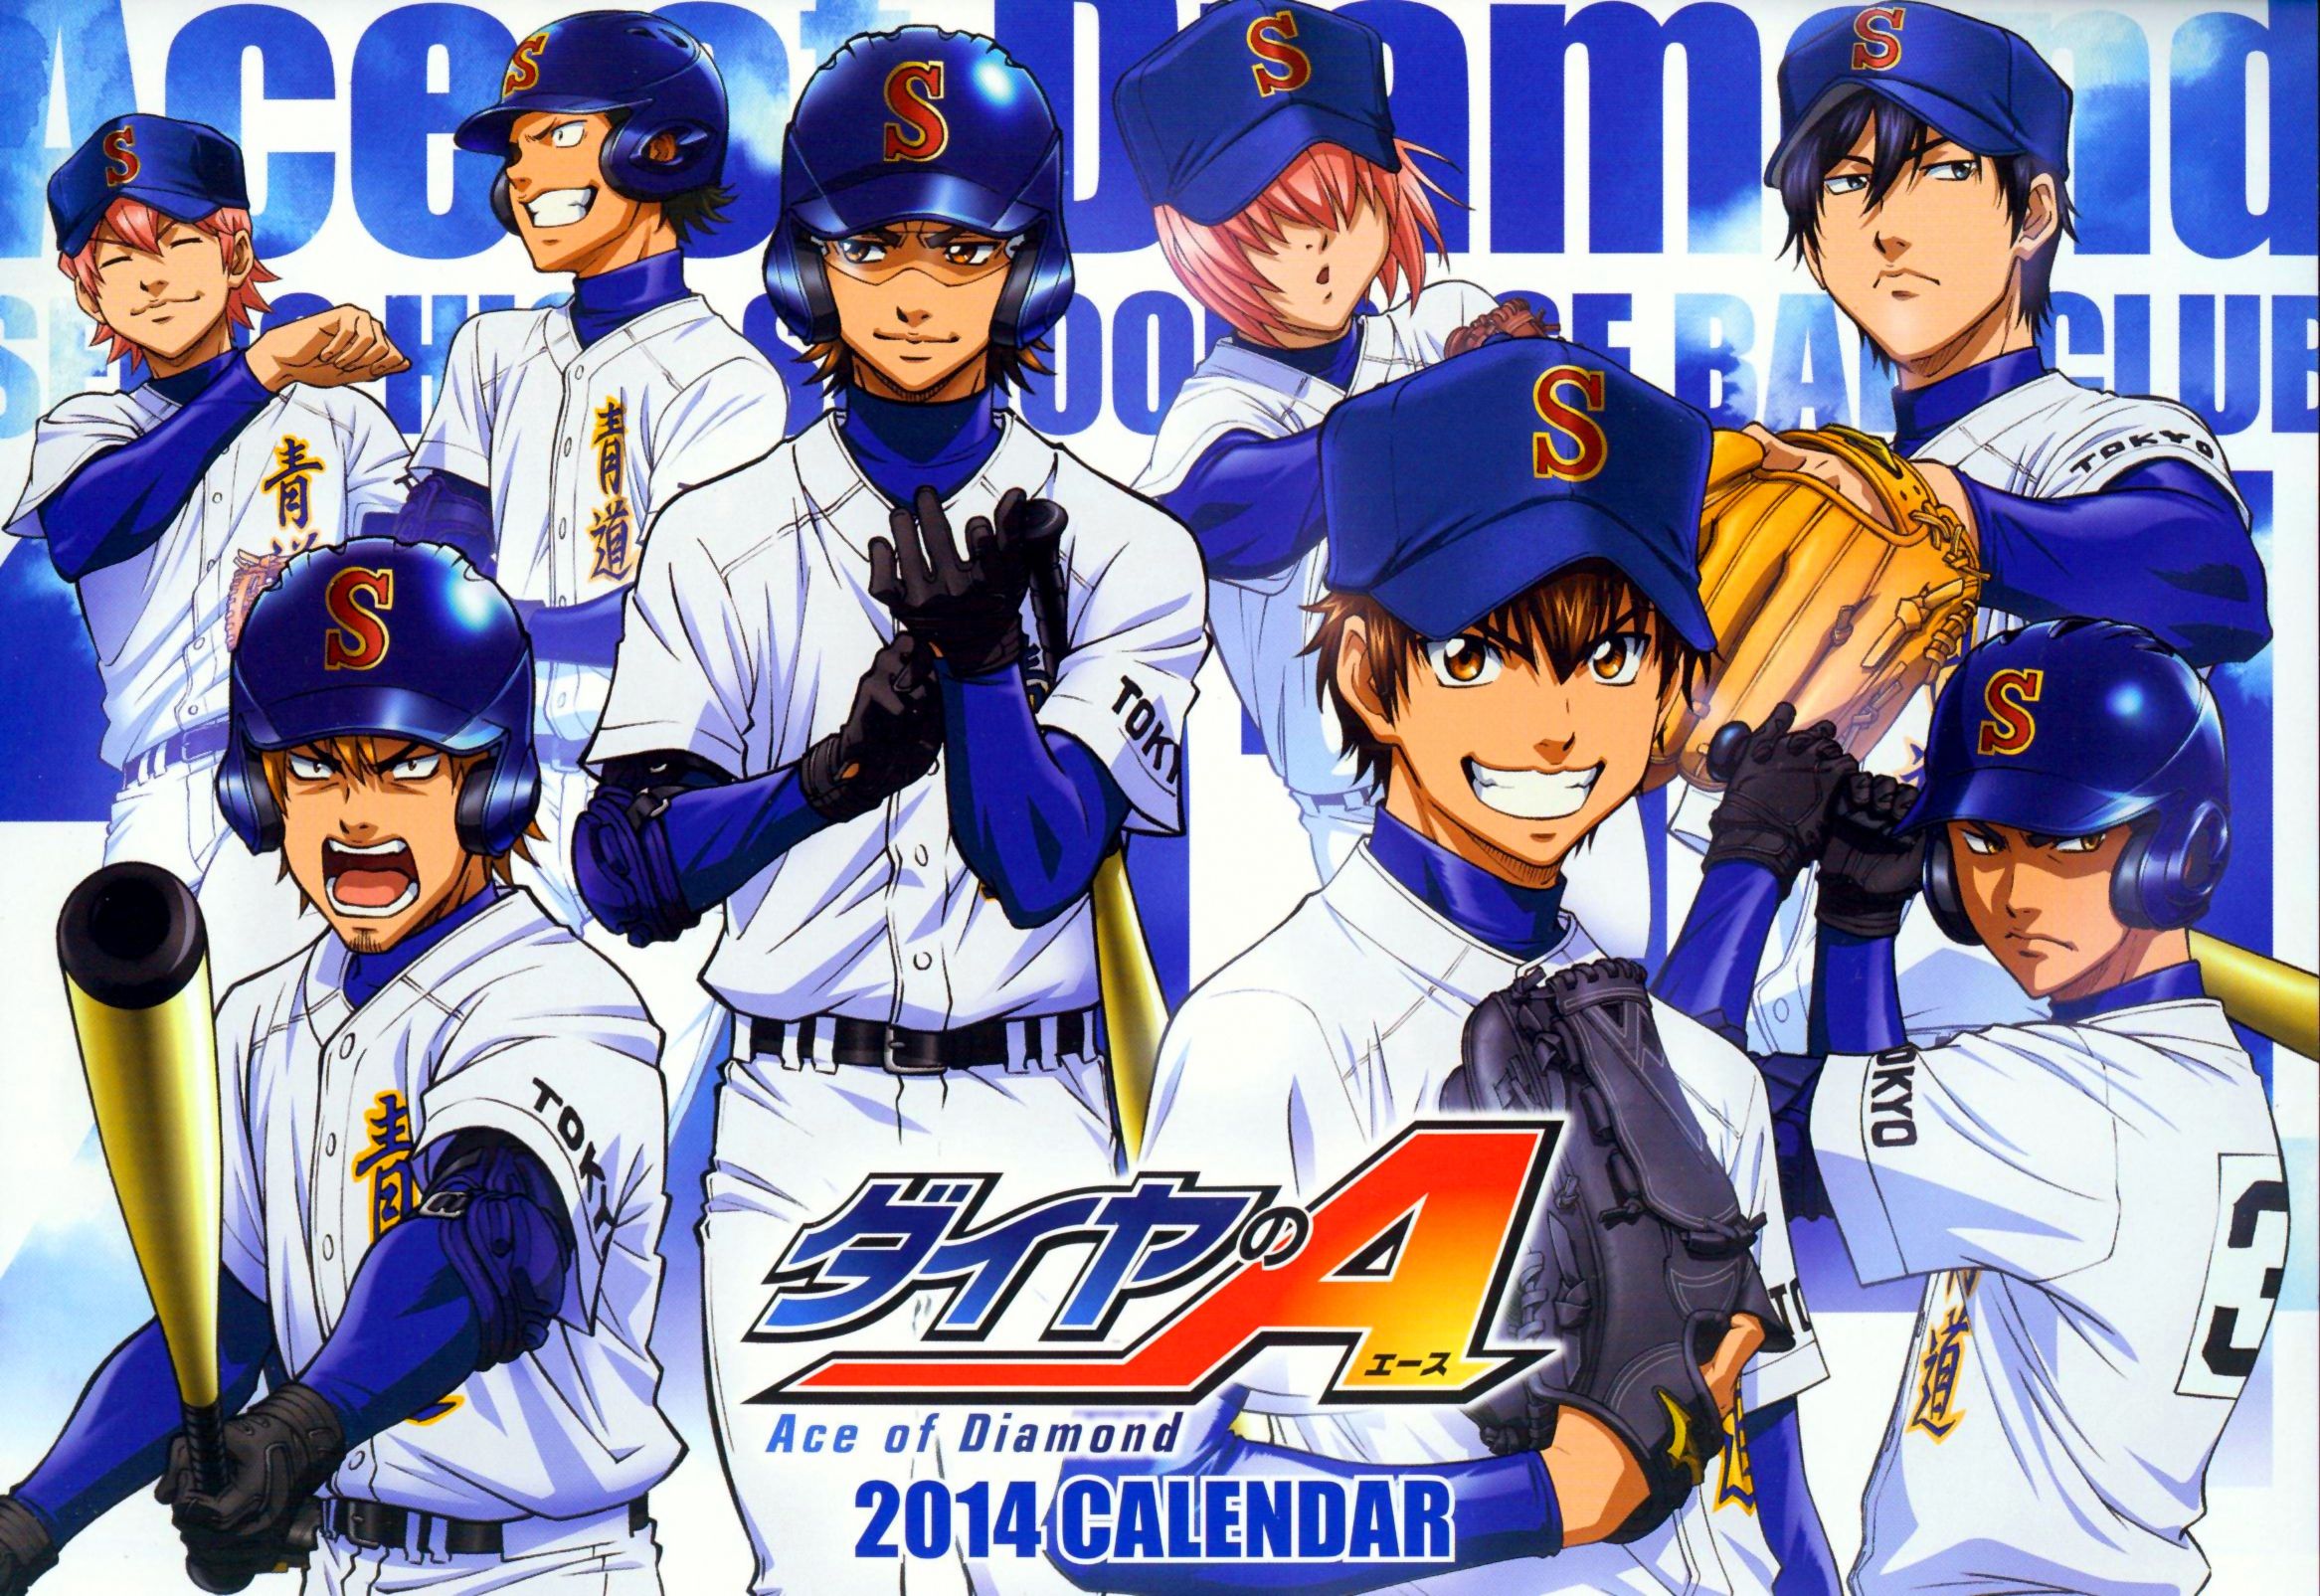 Ace of Diamond Season 4: Is It Confirmed?, Expected Premiere Date, and  Other Details  Ace of Diamond Season 4: Is It Confirmed?, Expected  Premiere Date, and Other Details. Ace of Diamond